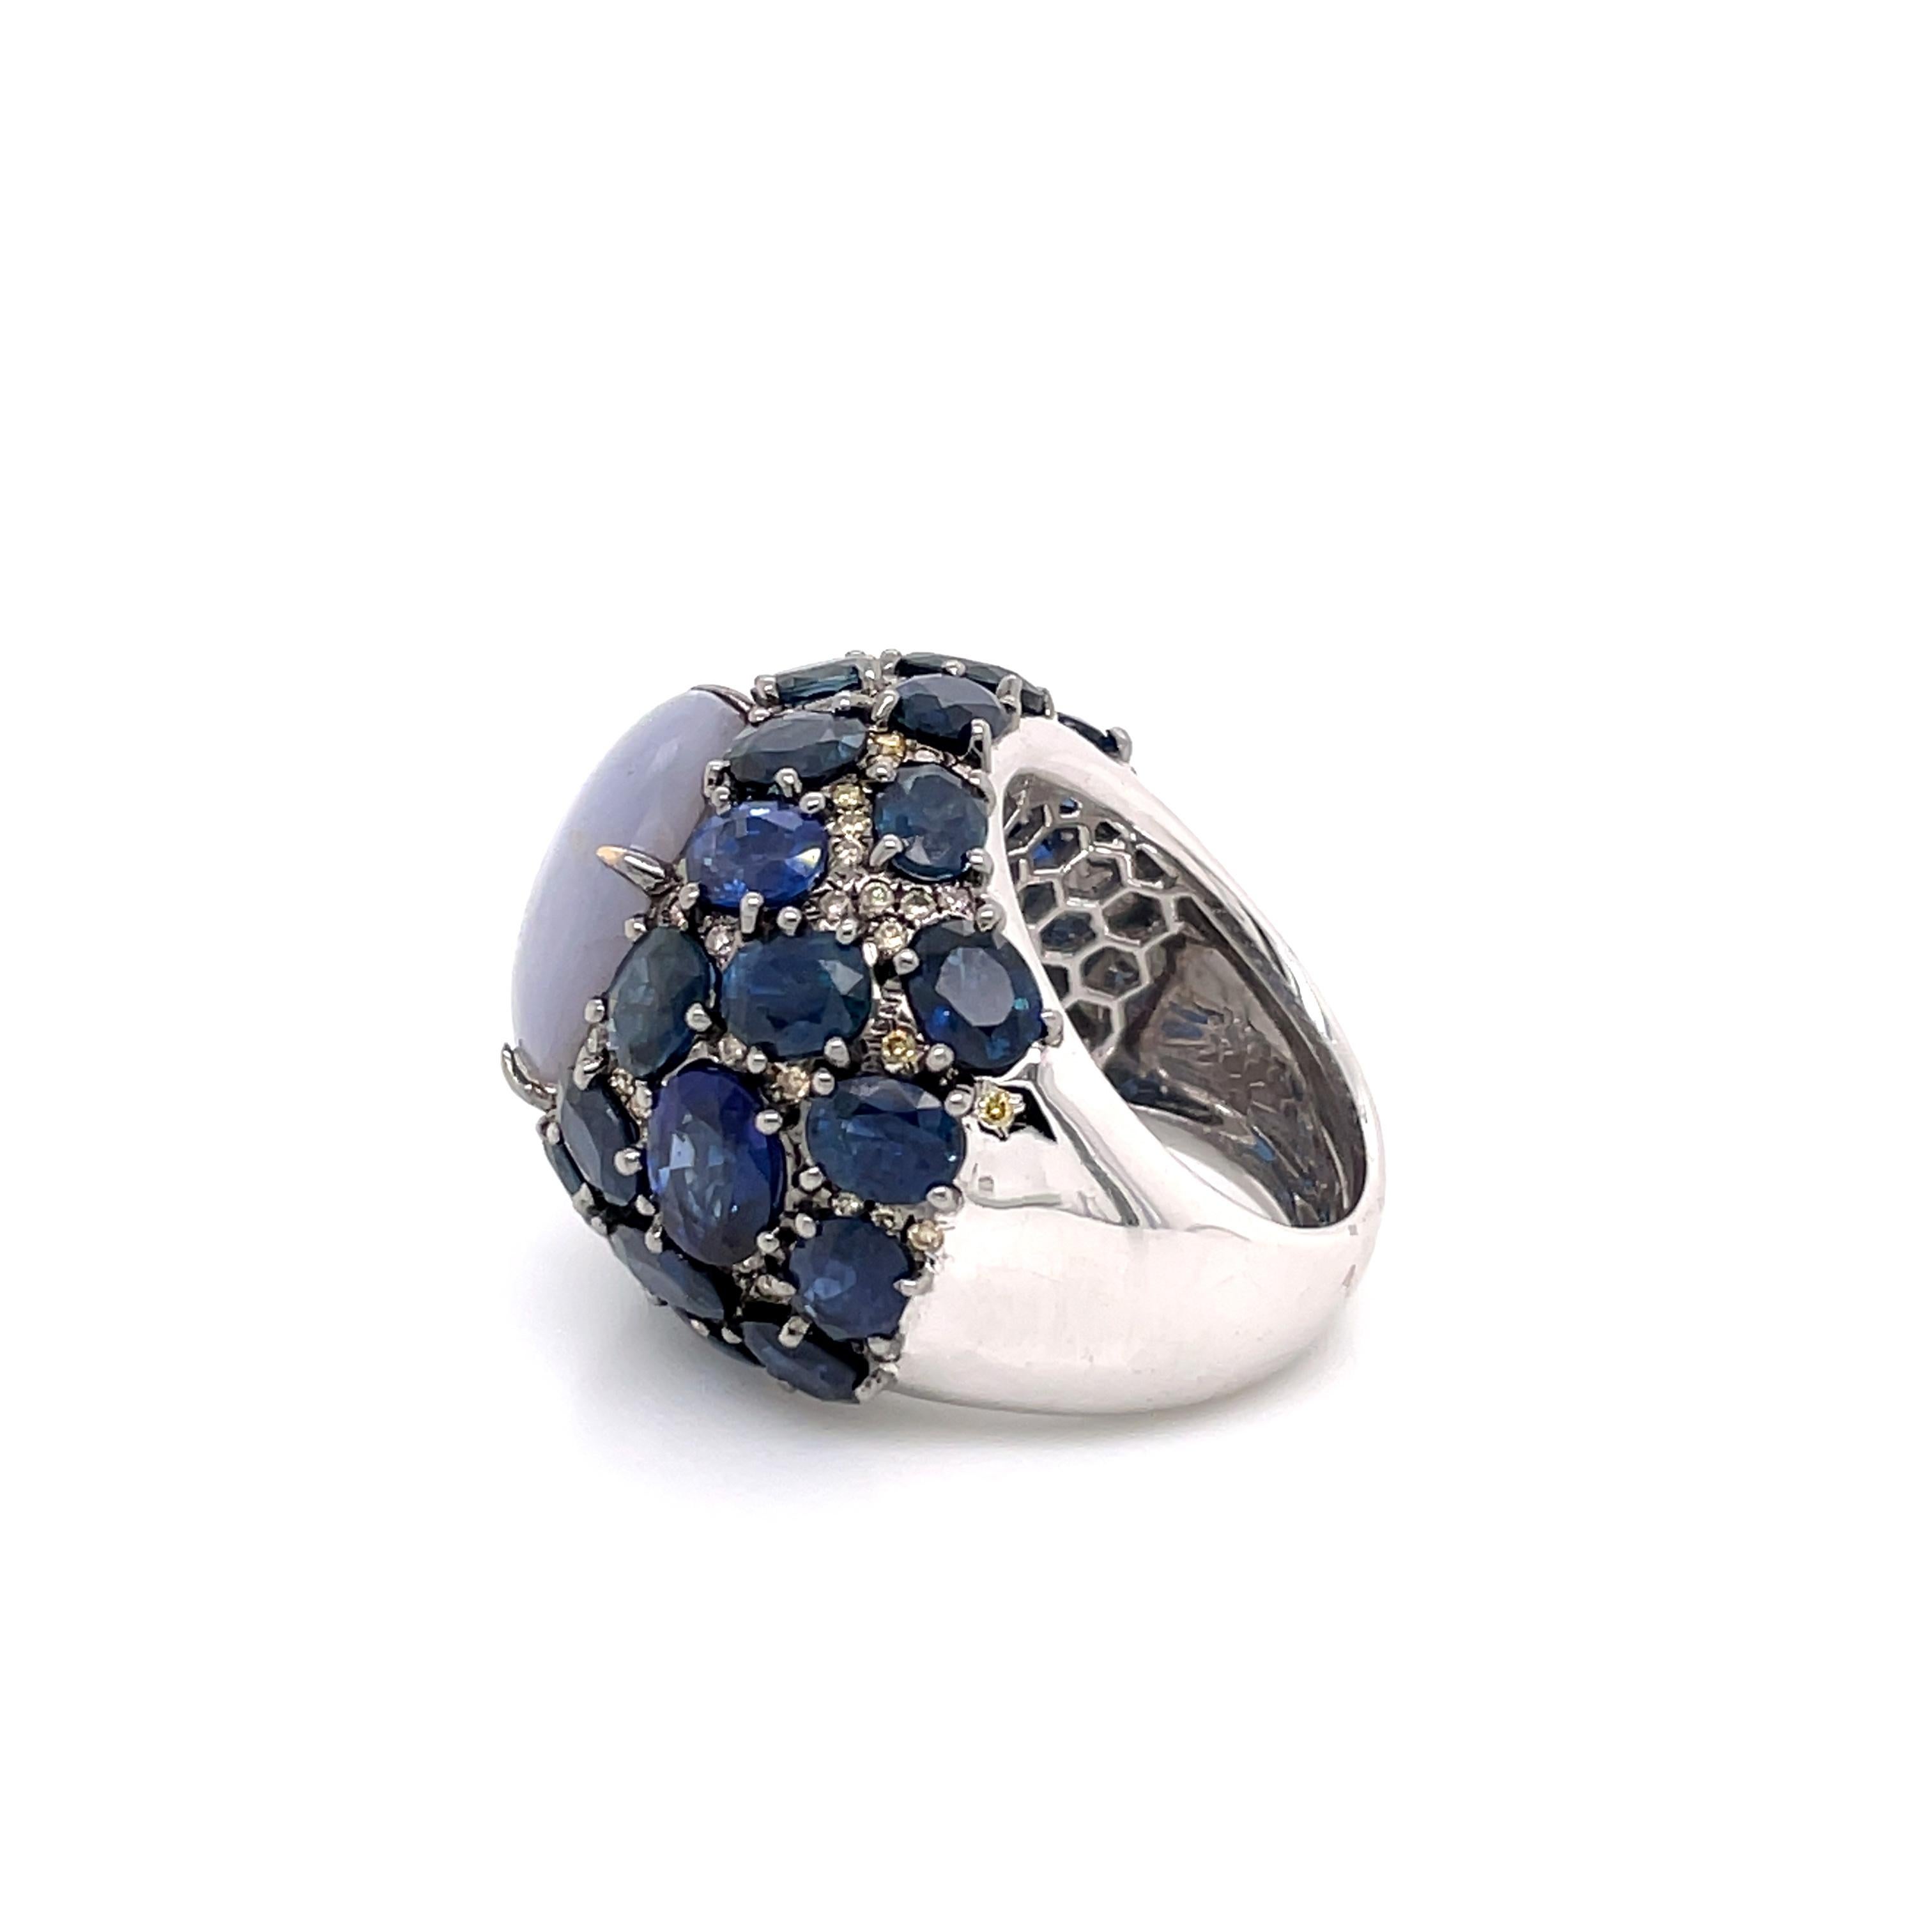 The Fancy Diamonds and Sapphire Surrounded Star Sapphire Hues of Blue Ring is a true masterpiece that captures the essence of celestial beauty. The centrepiece of the ring is a captivating star sapphire, displaying a mesmerizing play of blue hues